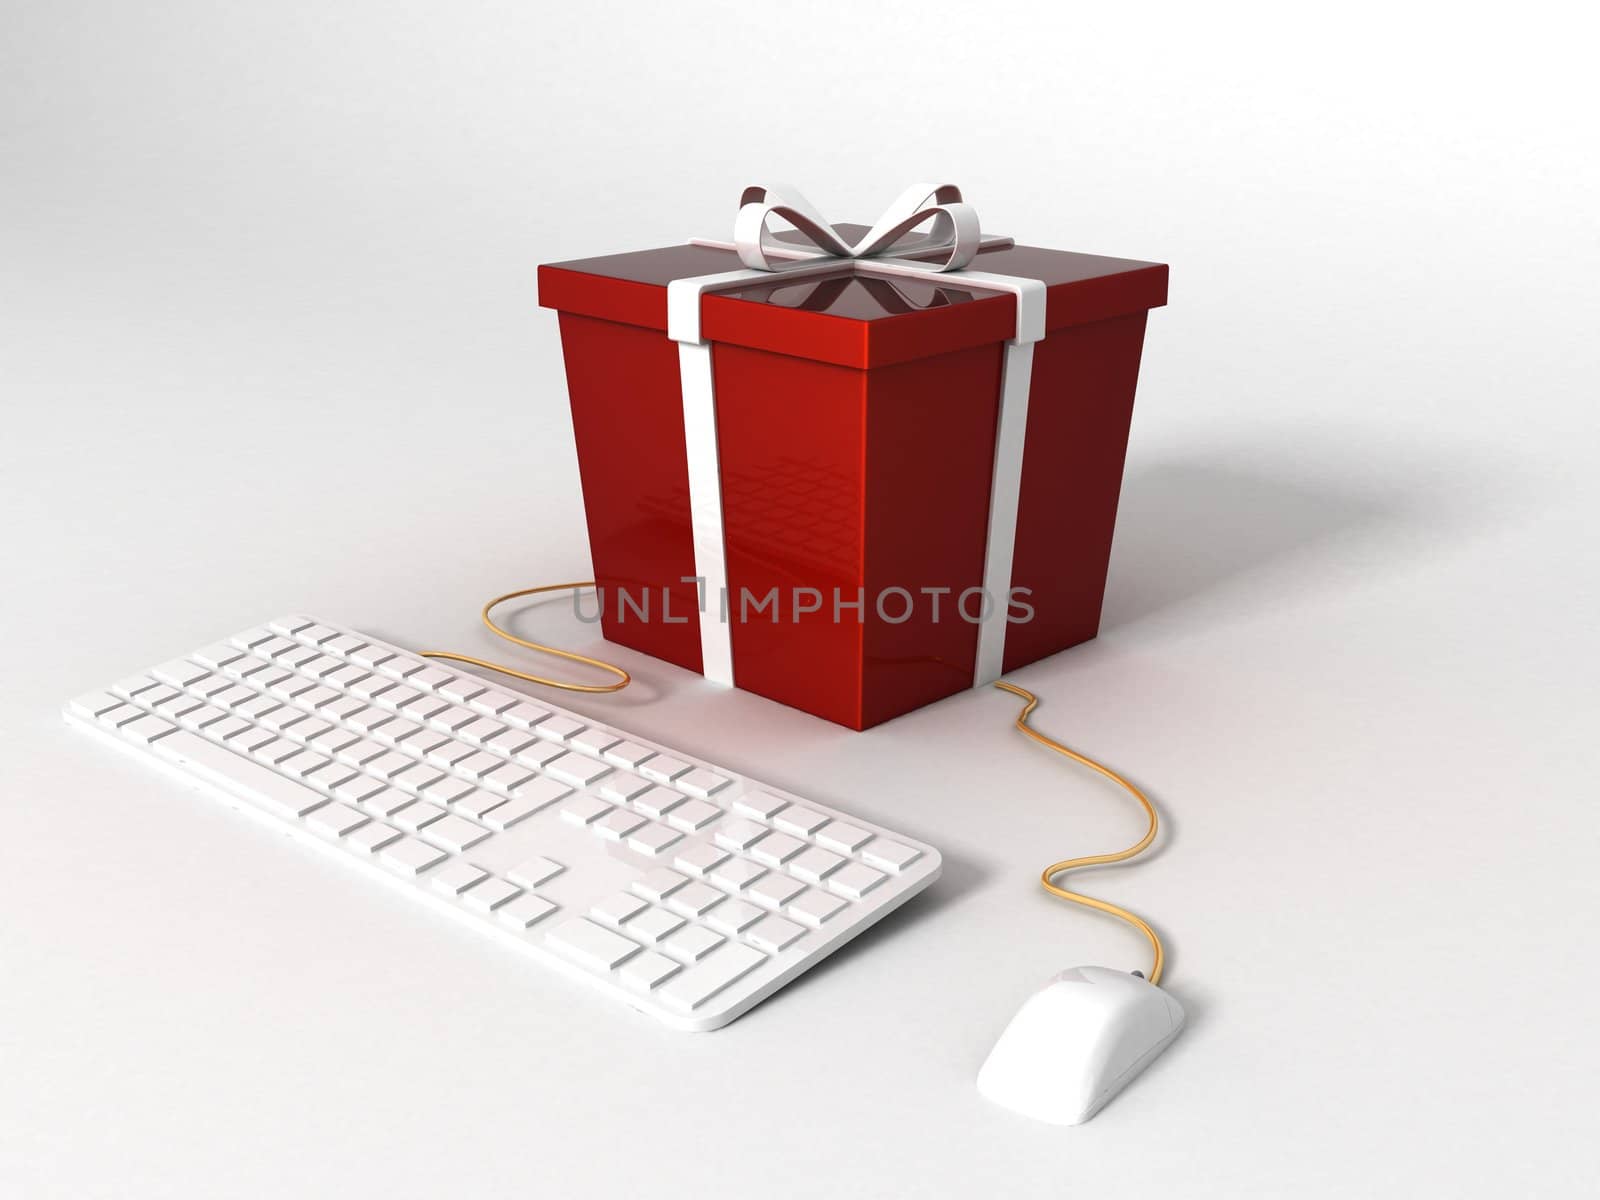  three dimensional  keyboard ,mouse and wrapped gift on an isolated background